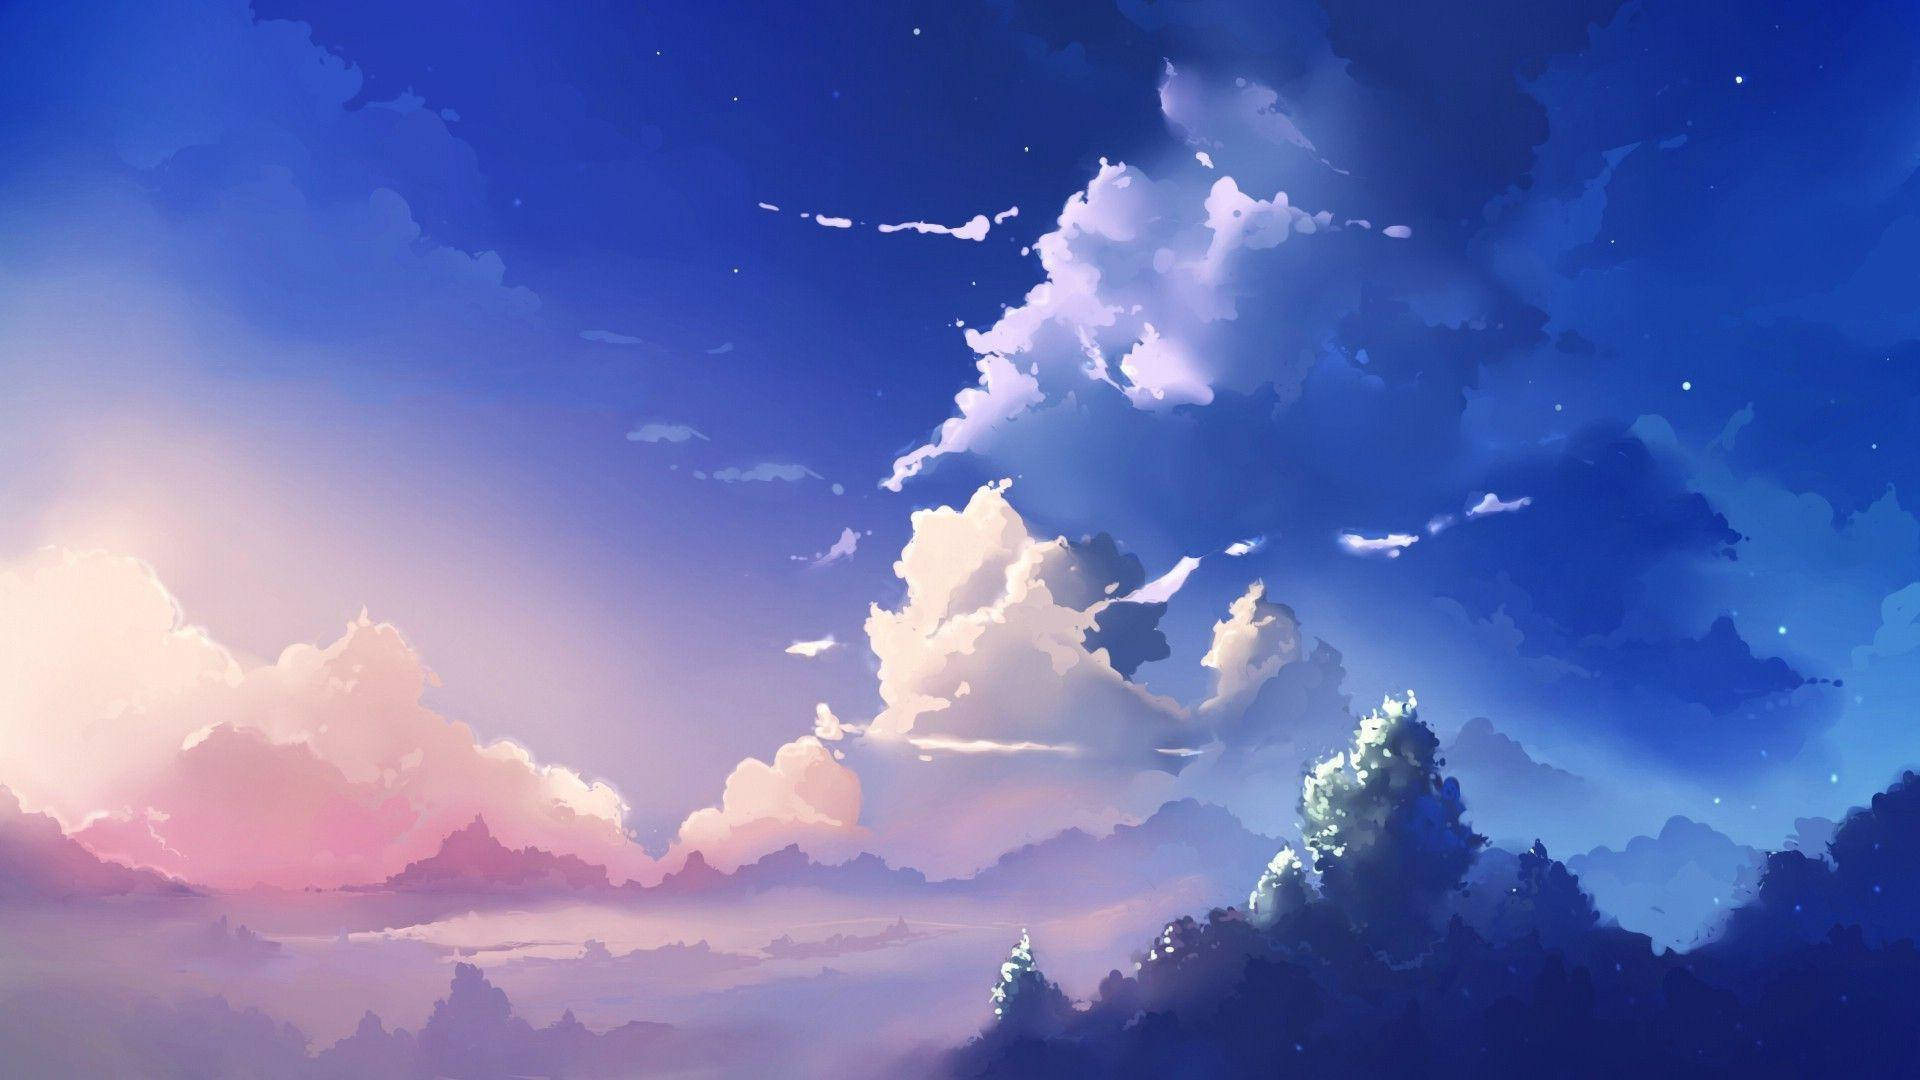 Download Purple Clouds Aesthetic Anime Scenery Wallpaper ...